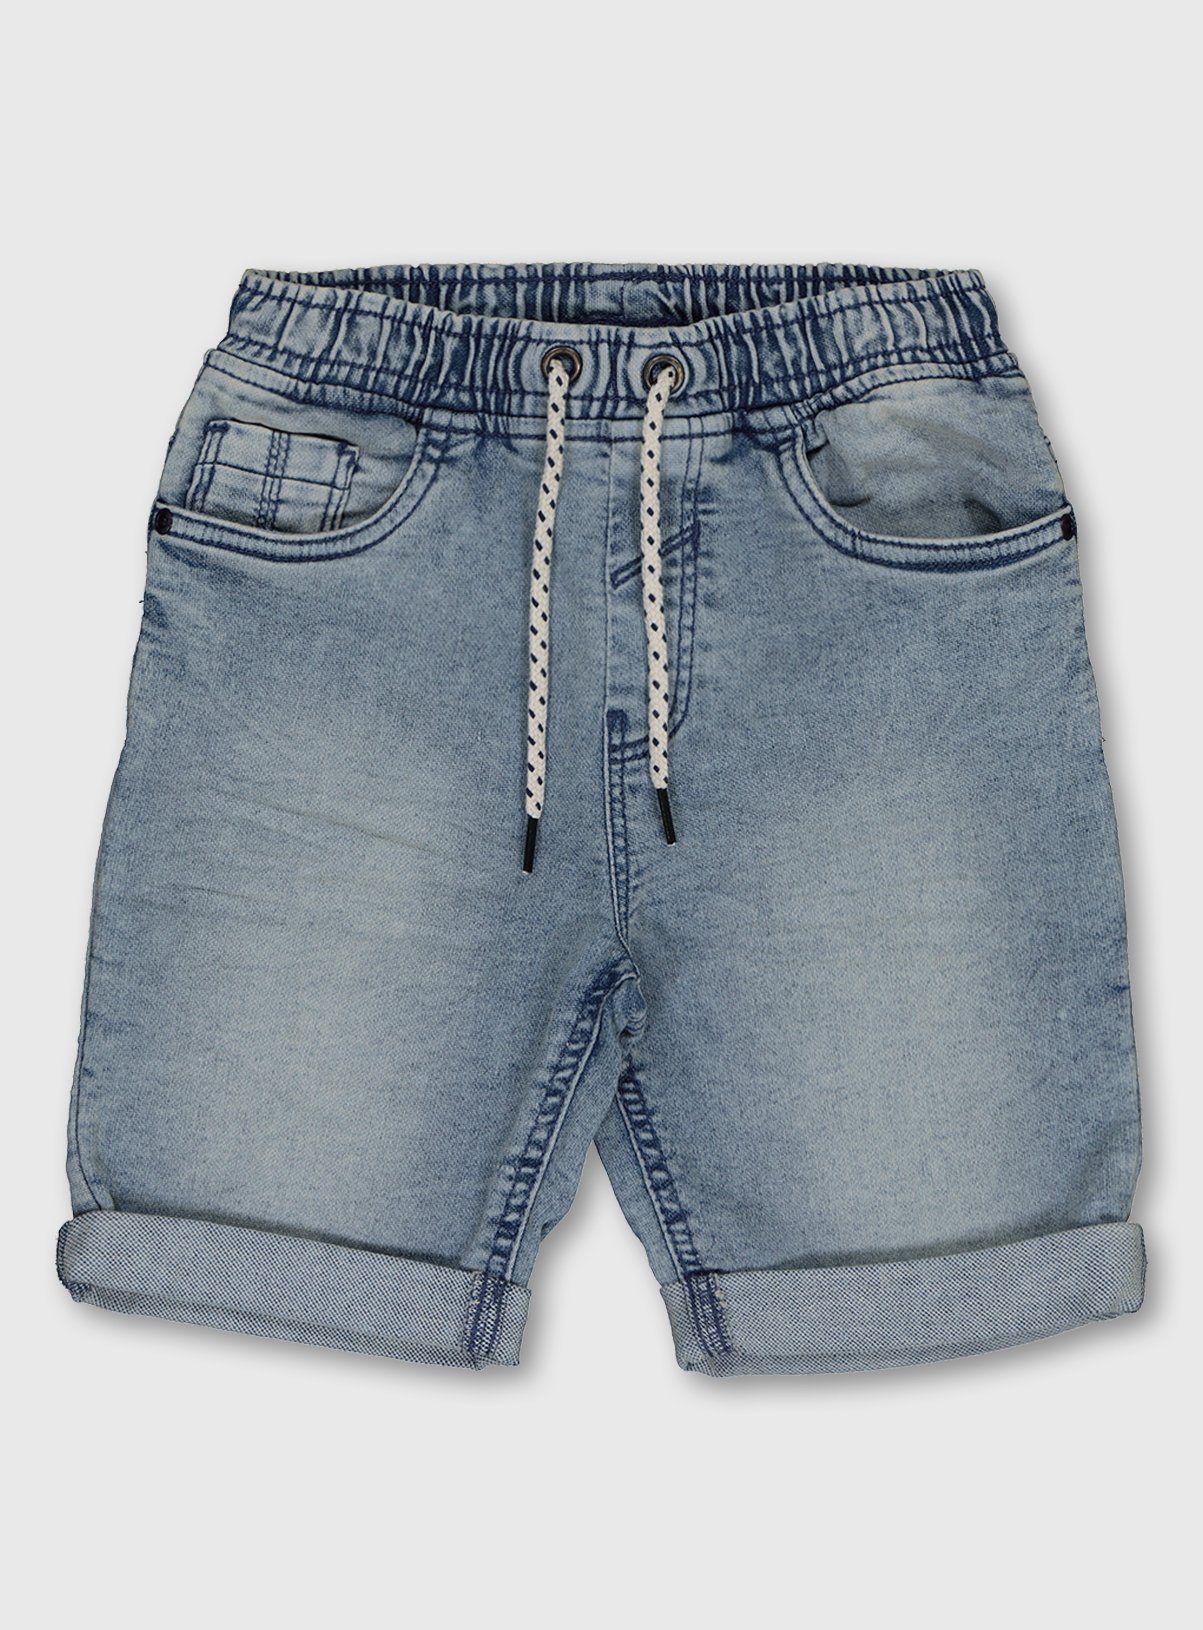 Light Wash Regular Fit Denim Shorts With Stretch Review